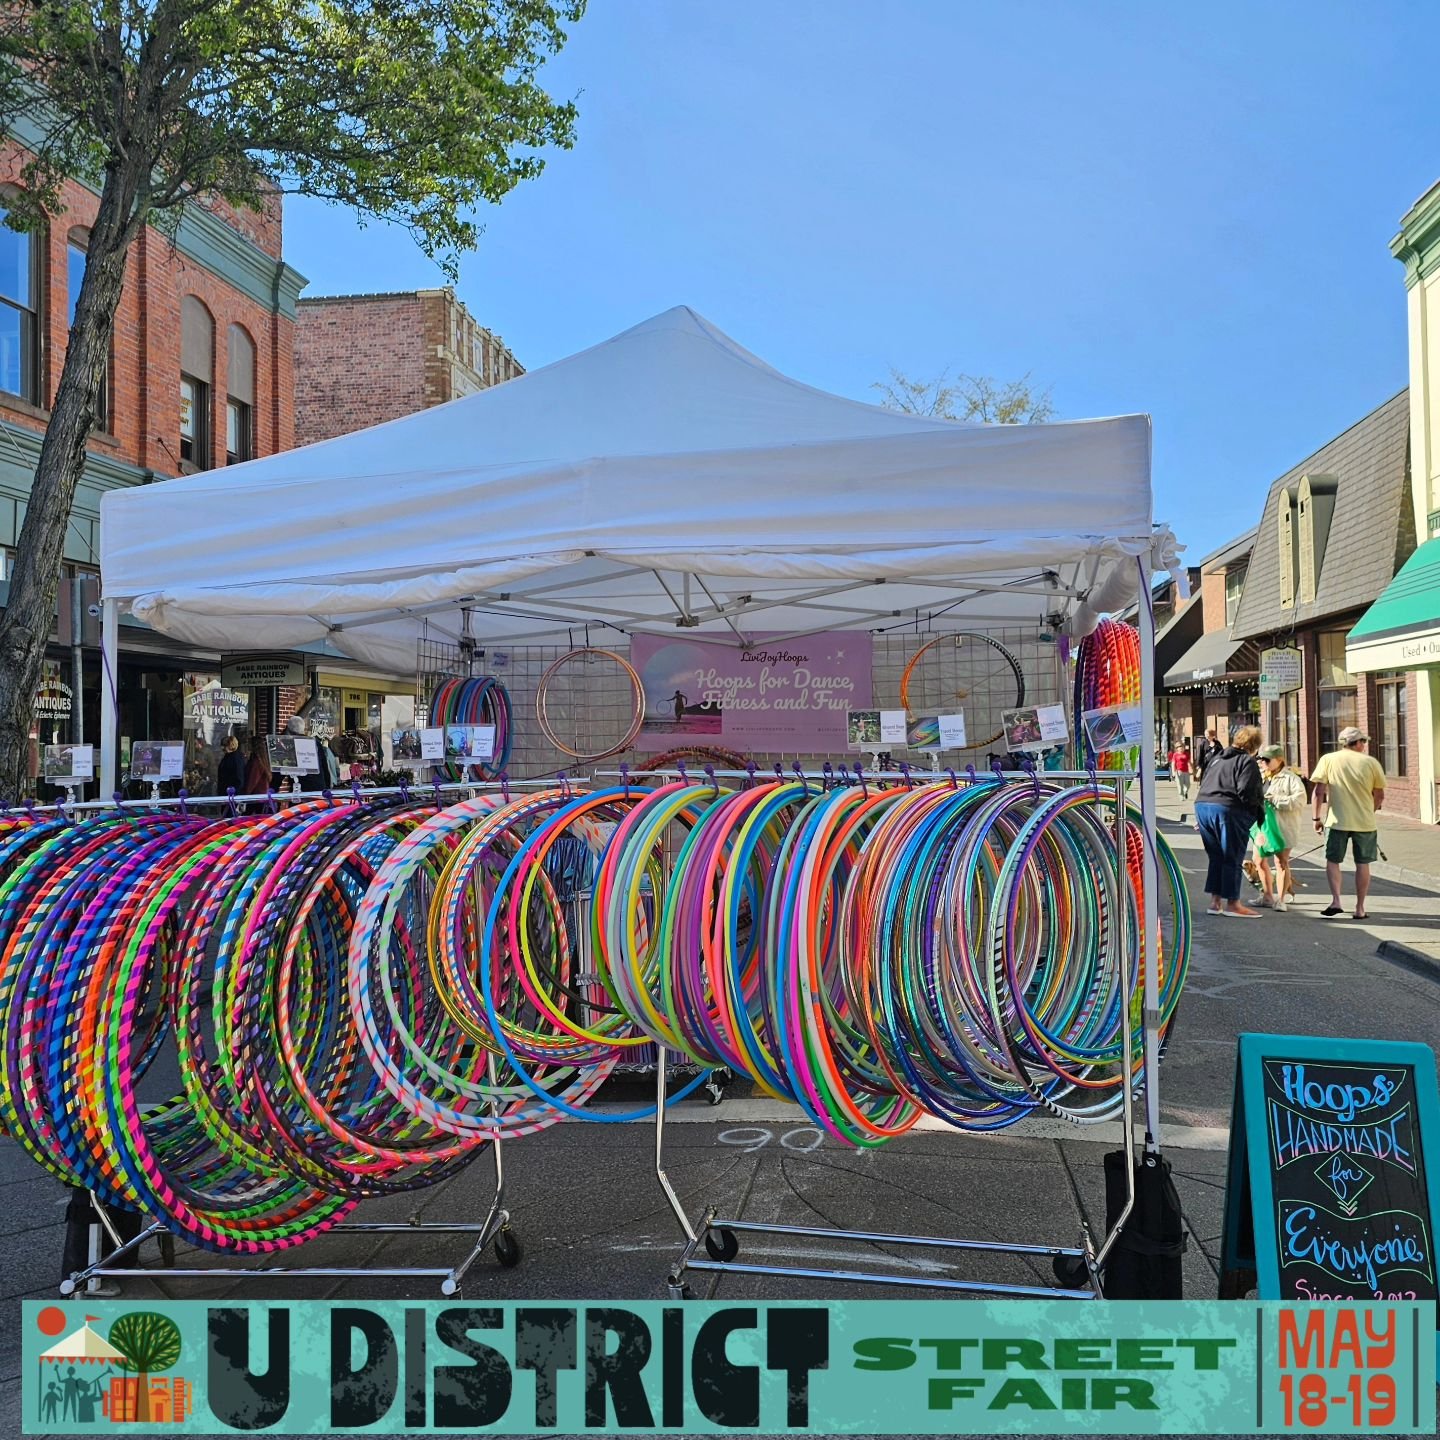 #UDistrictStreetFair is back!&nbsp;Make your way to the U District Street Fair, May 18-19, to visit Seattle&rsquo;s largest outdoor arts &amp; crafts event, featuring two days of live music, 350 vendors and 3 delicious food courts! Come see&nbsp;@Liv